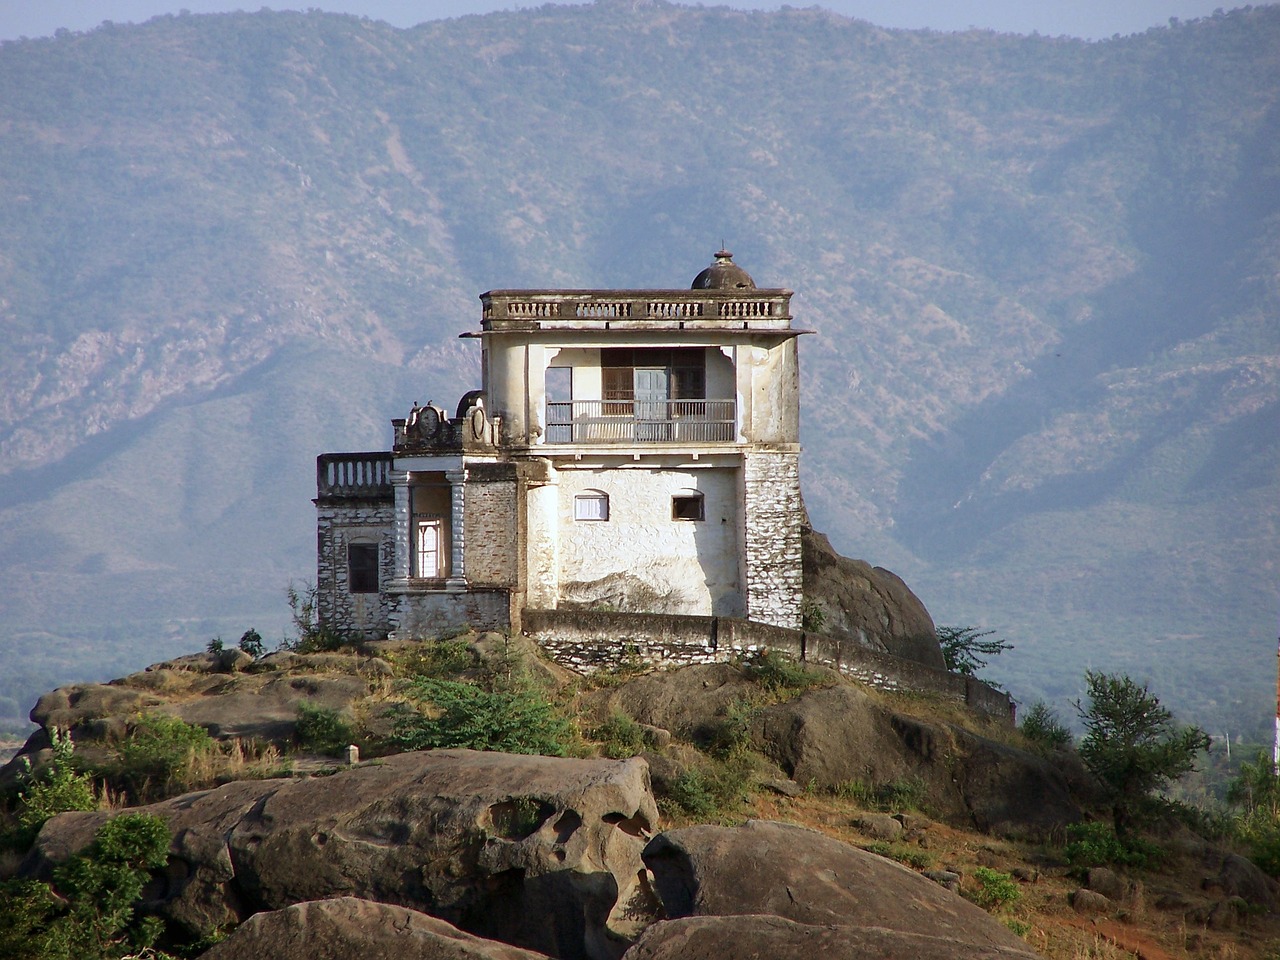 Mount Abu and Udaipur Adventure: A 5-Day Trip